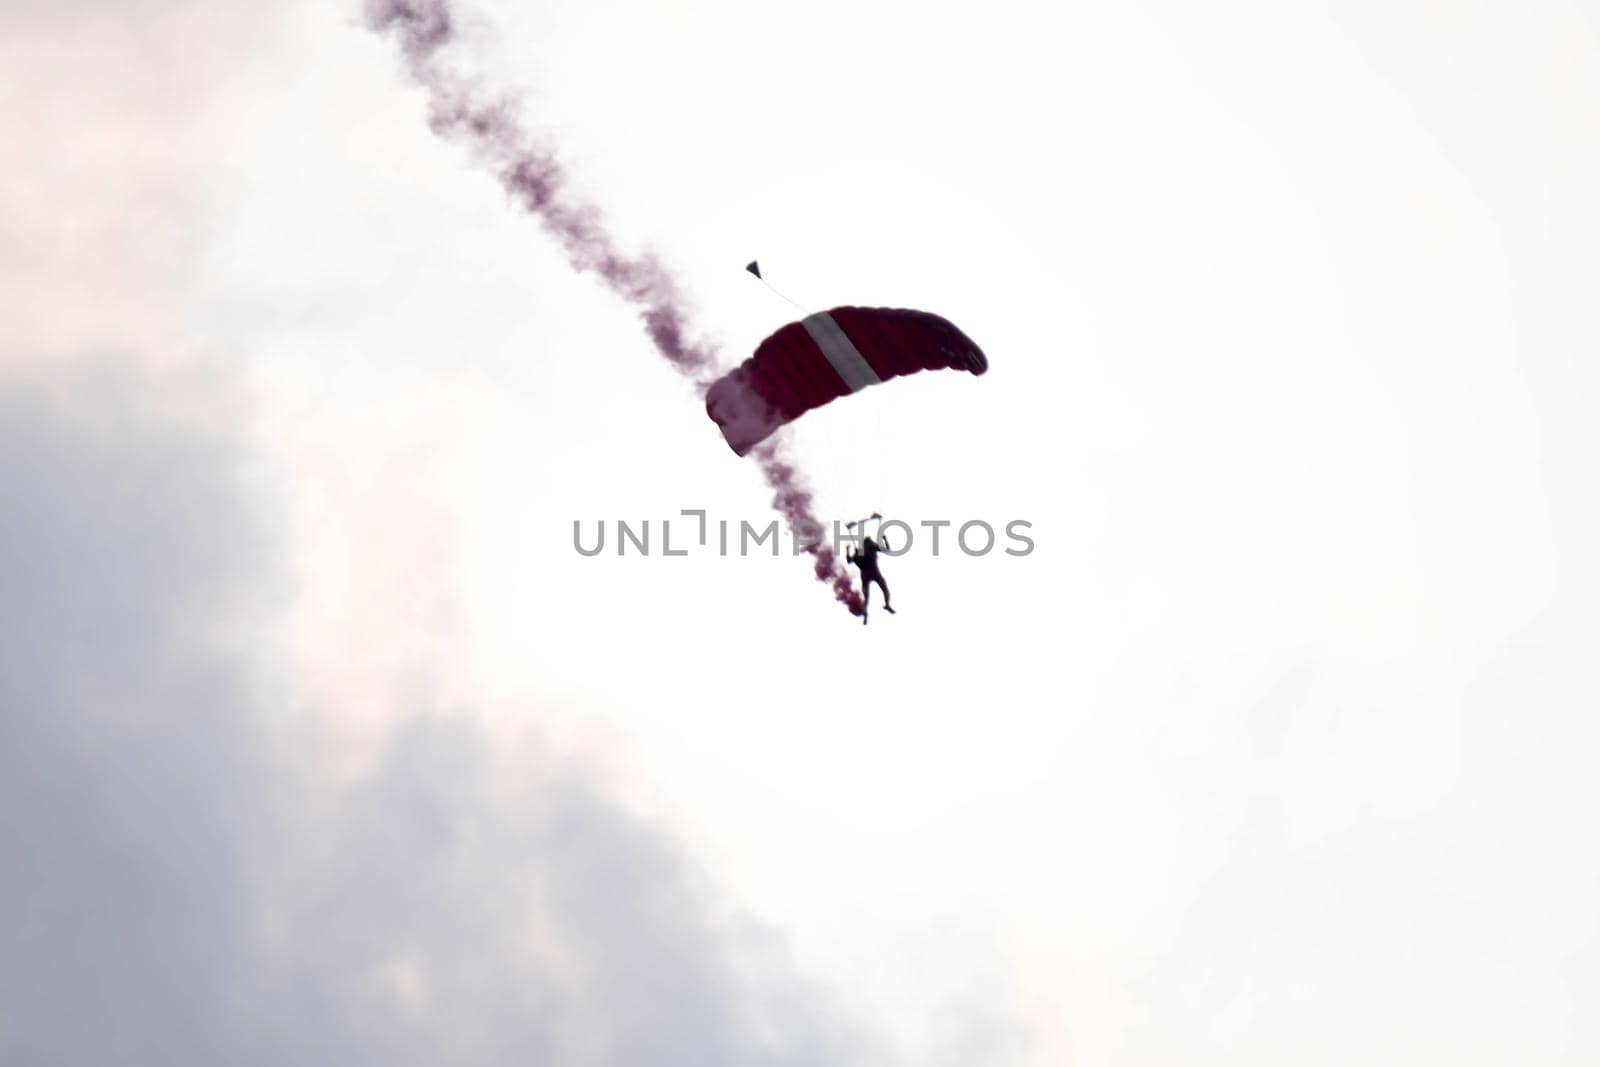 silhouette parachute stunt unfocused and blurry while gliding in the air with red smoke trail during an air exhibition in Singapore